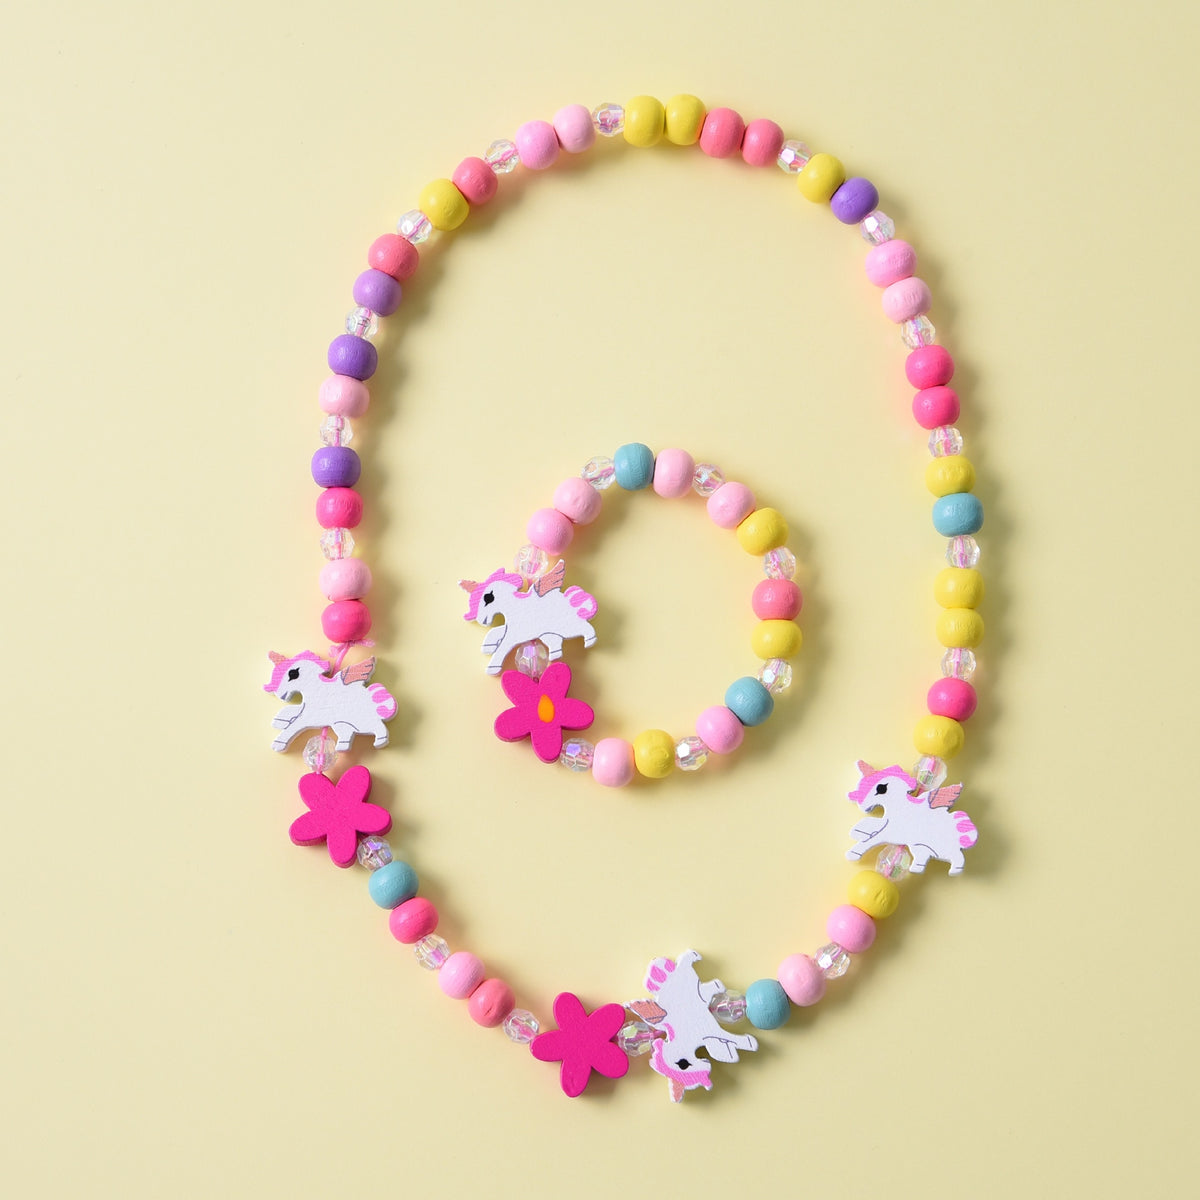 2pcs/Set Natural Wood Beads Jewelry Cute Animal Pattern Necklace Bracelet For Children Party Jewelry Girl Birthday Gift